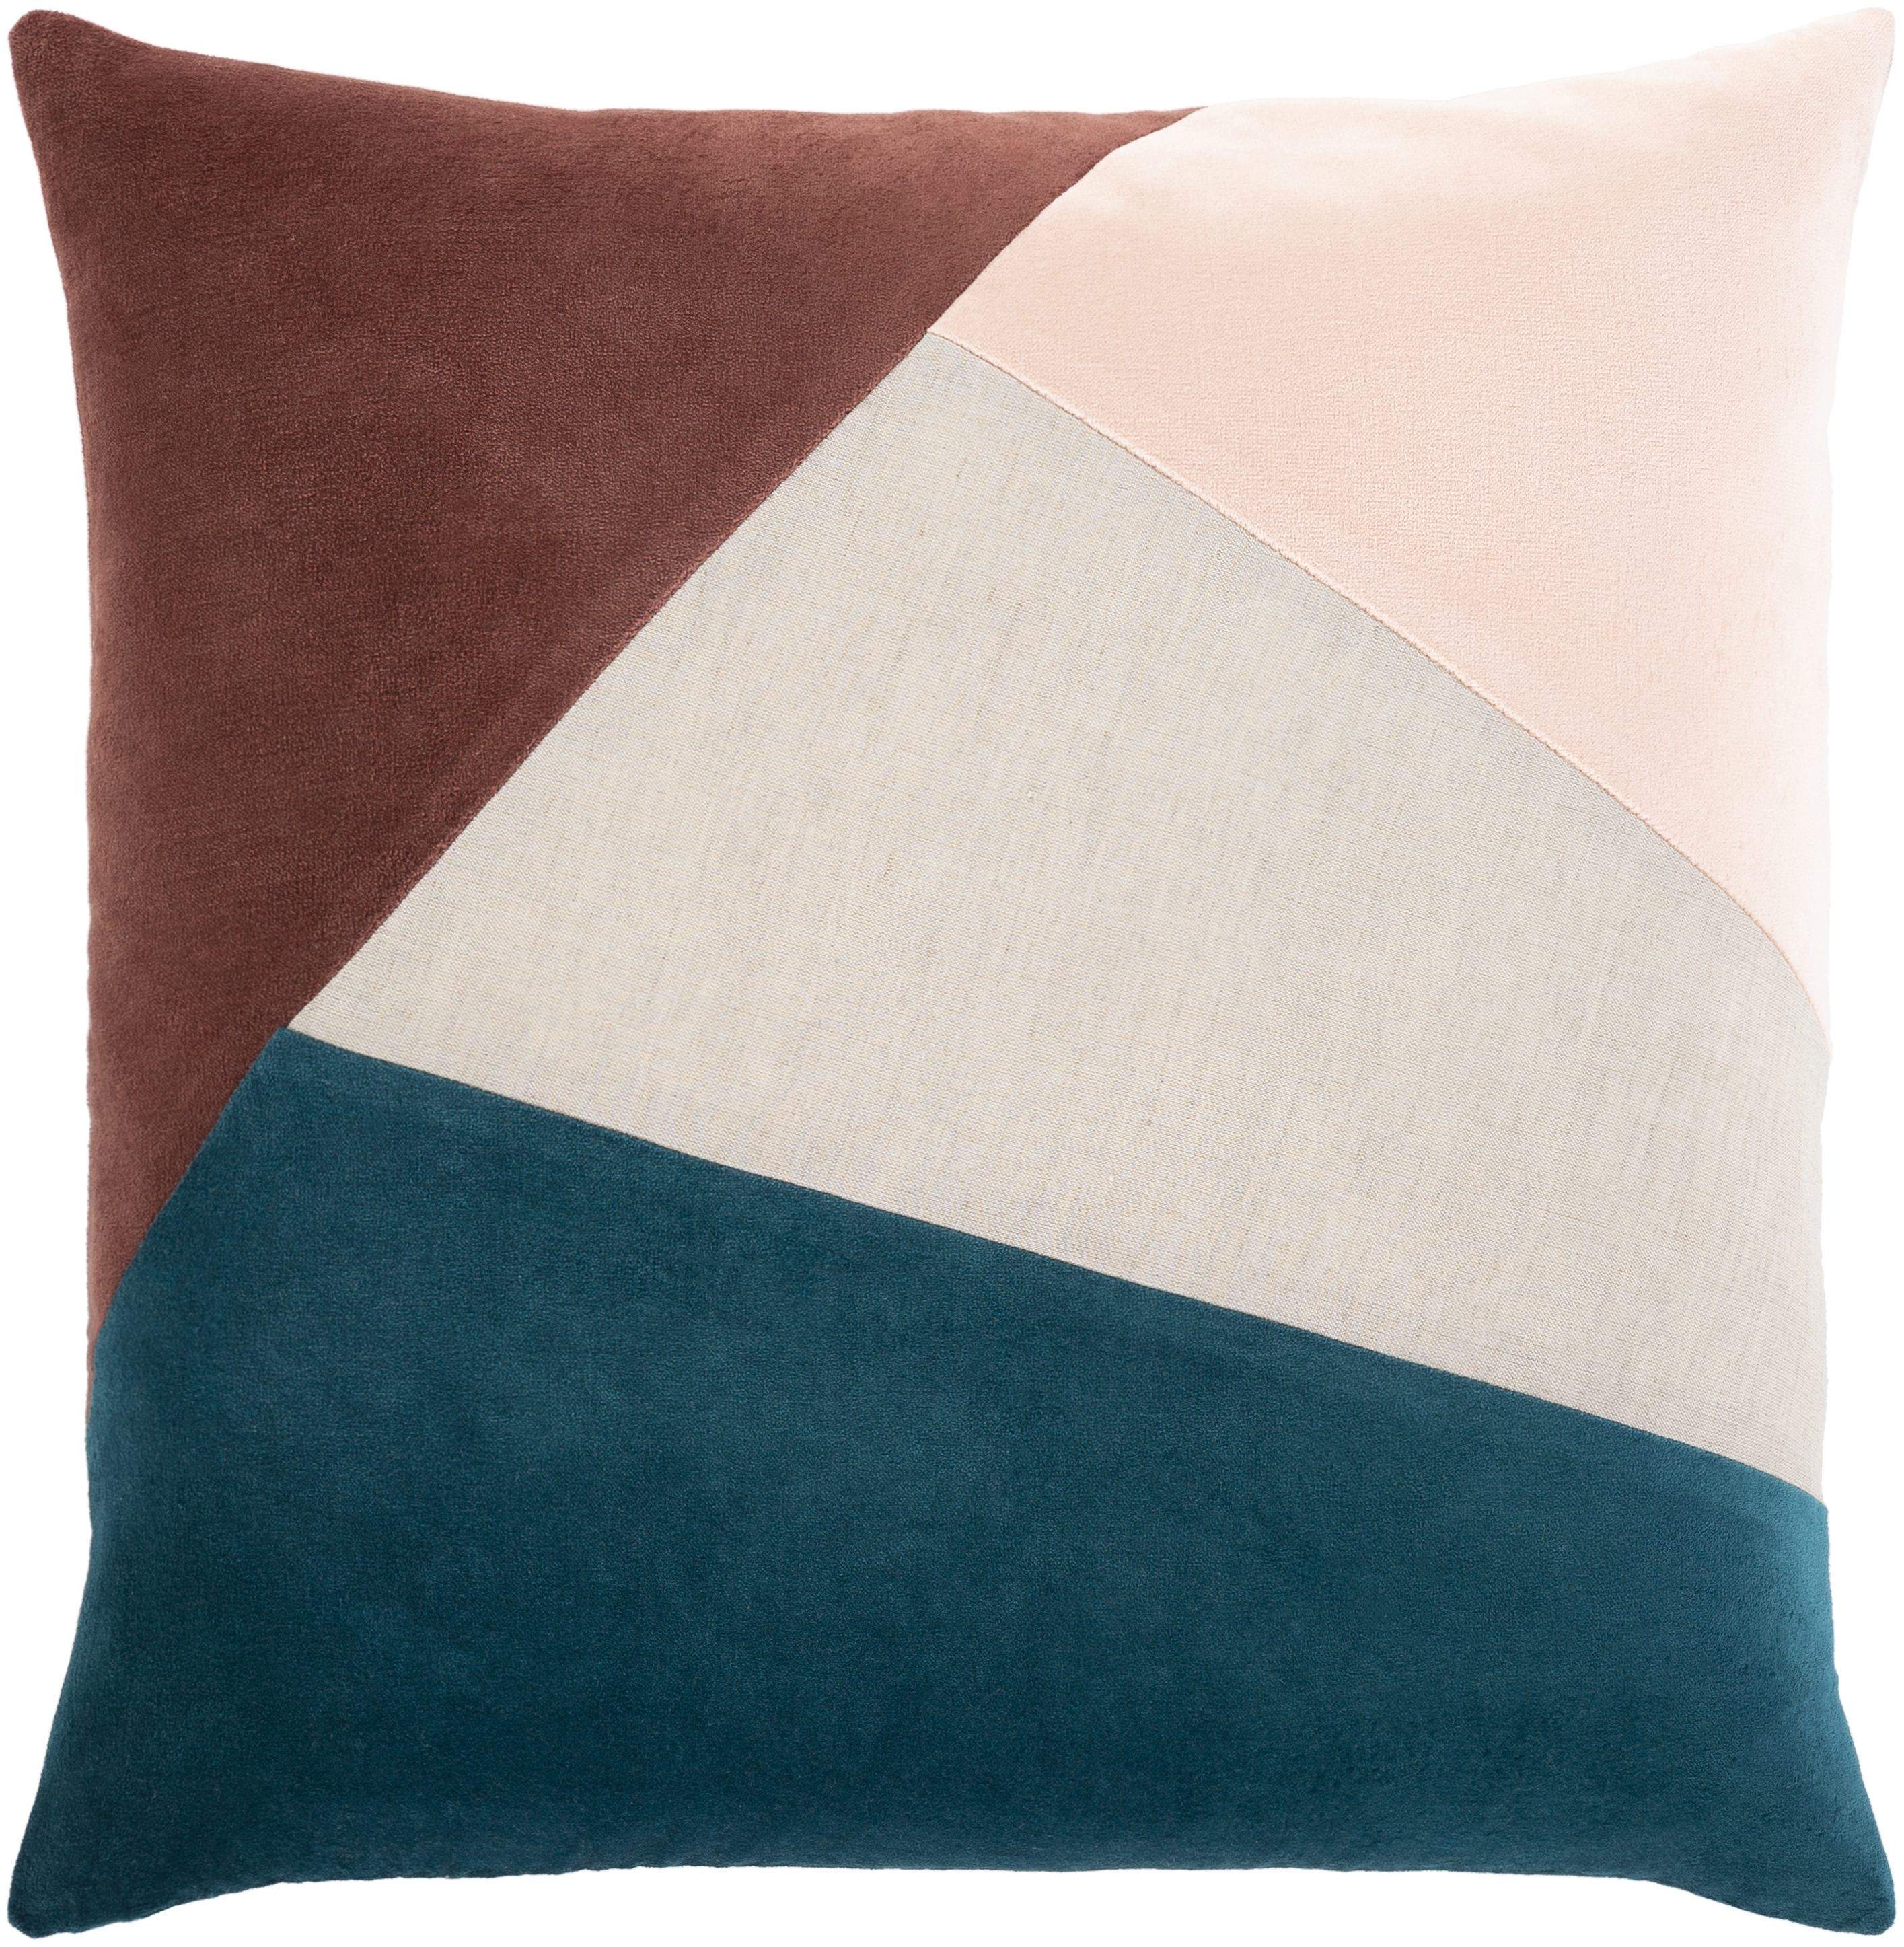 Moza Throw Pillow, 20" x 20", with down insert - Image 0